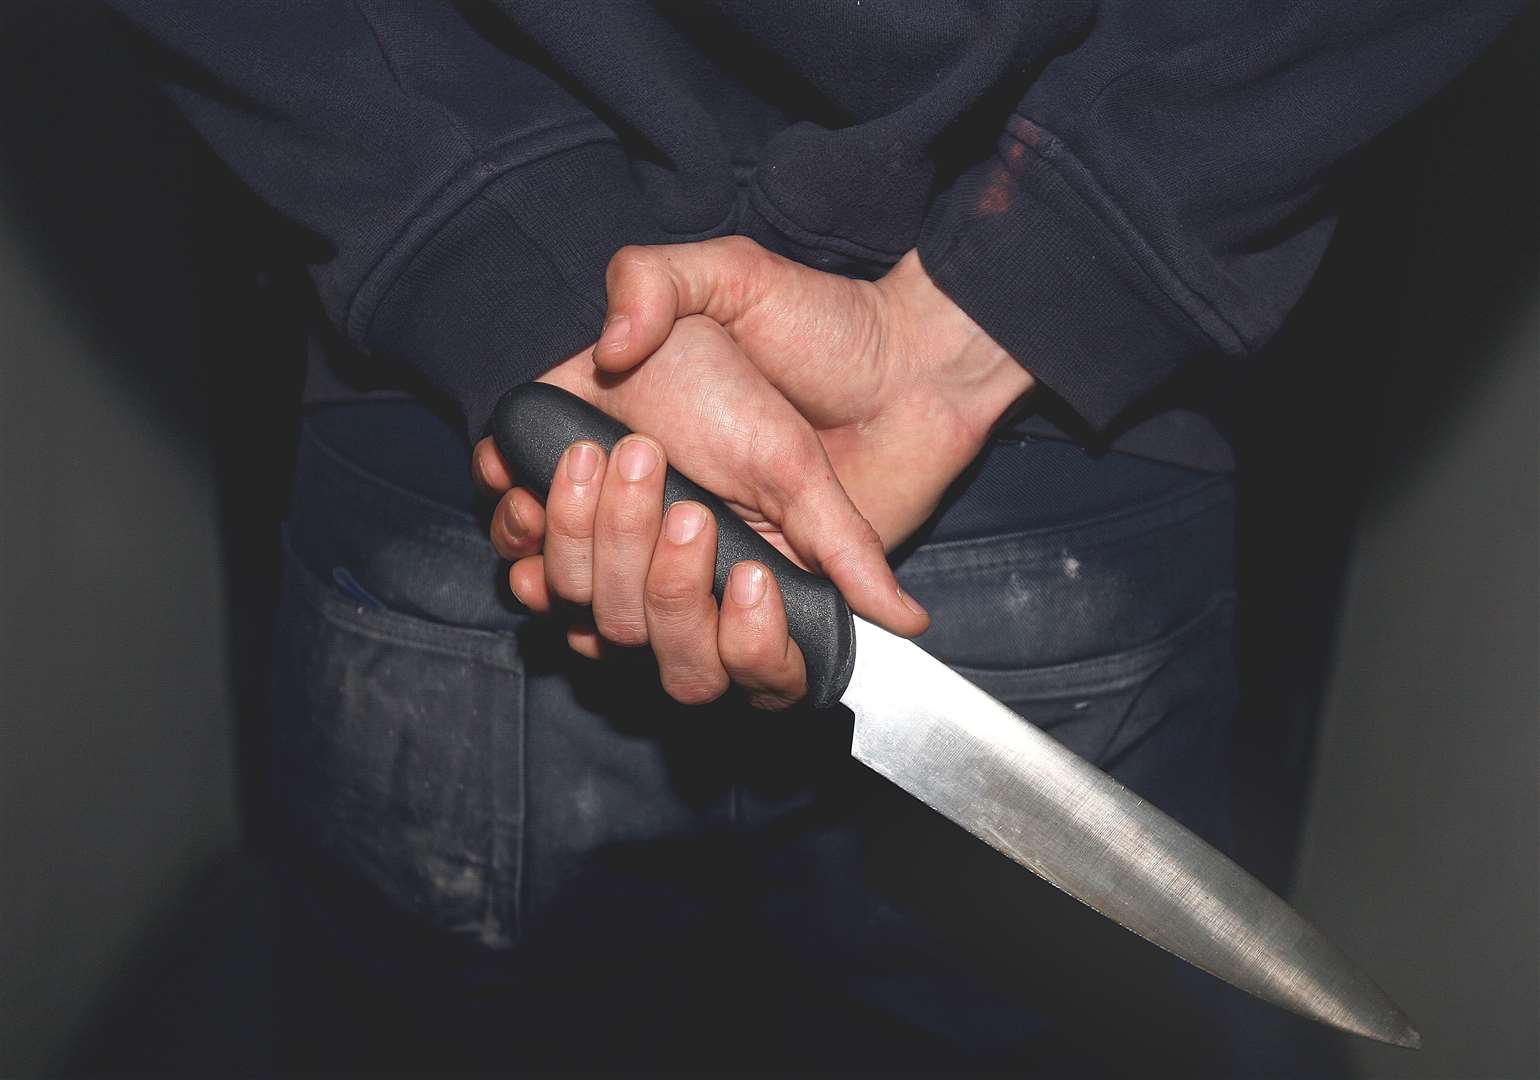 Lennox named knife crime as another area where criminal activity continued